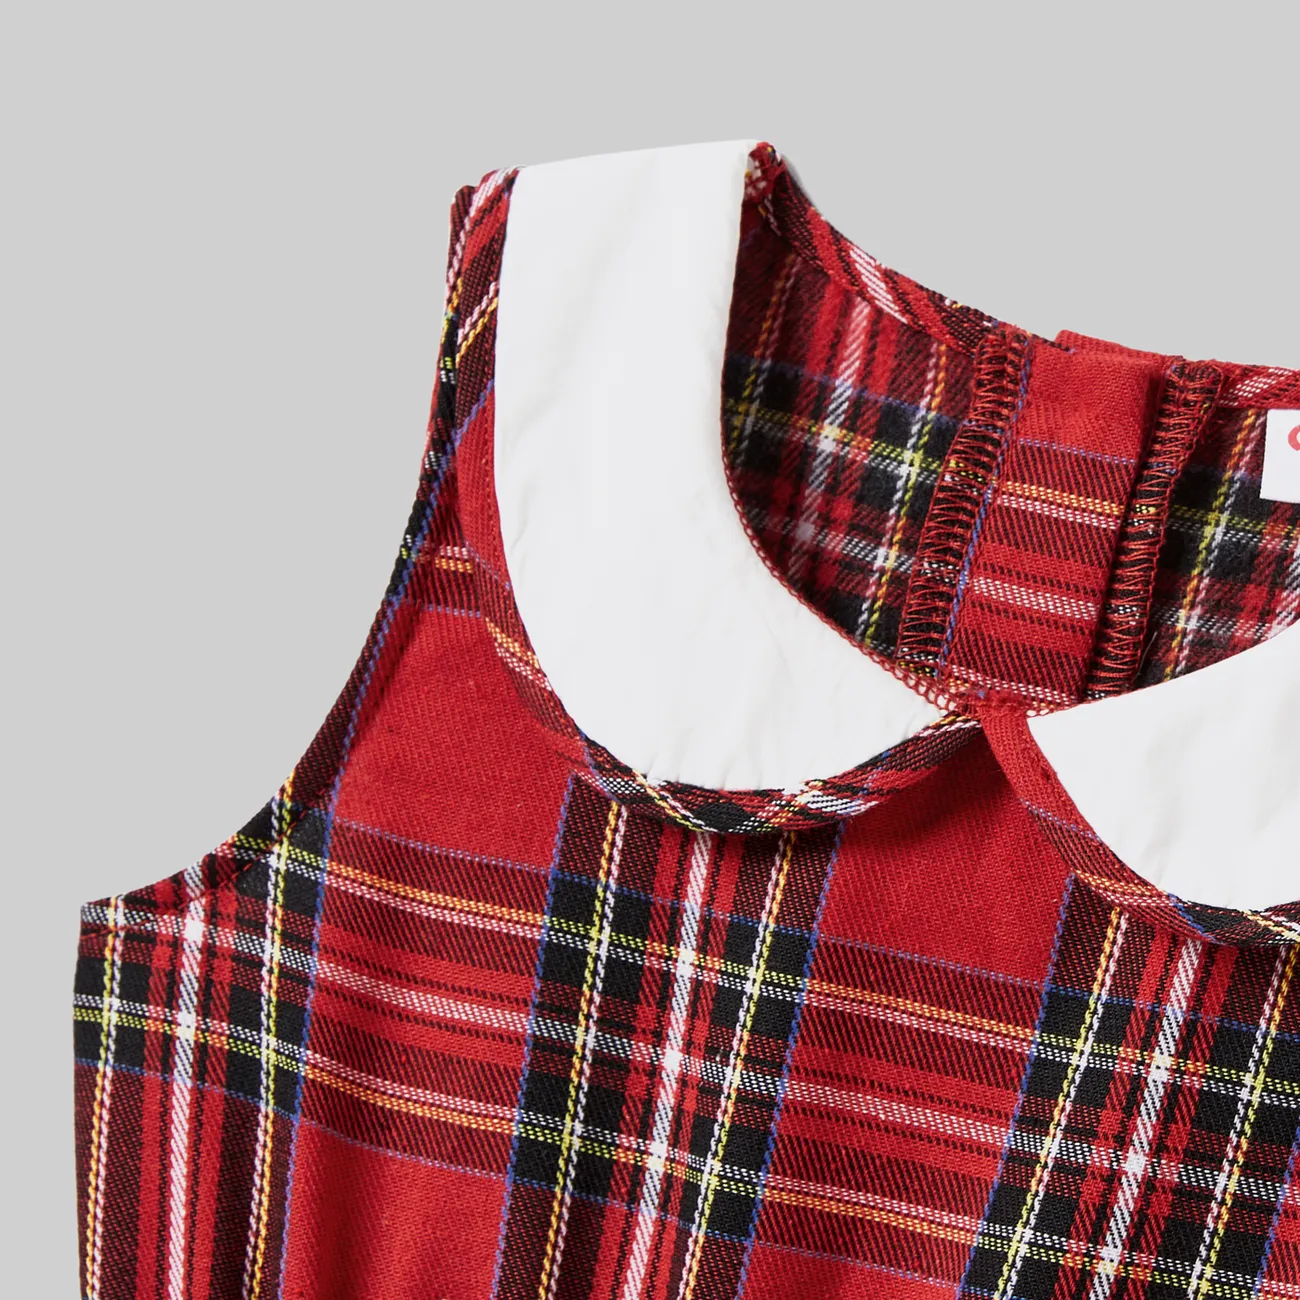 Christmas Family Matching Plaid Tops and Sleeveless Belted Dresses Sets Red big image 1